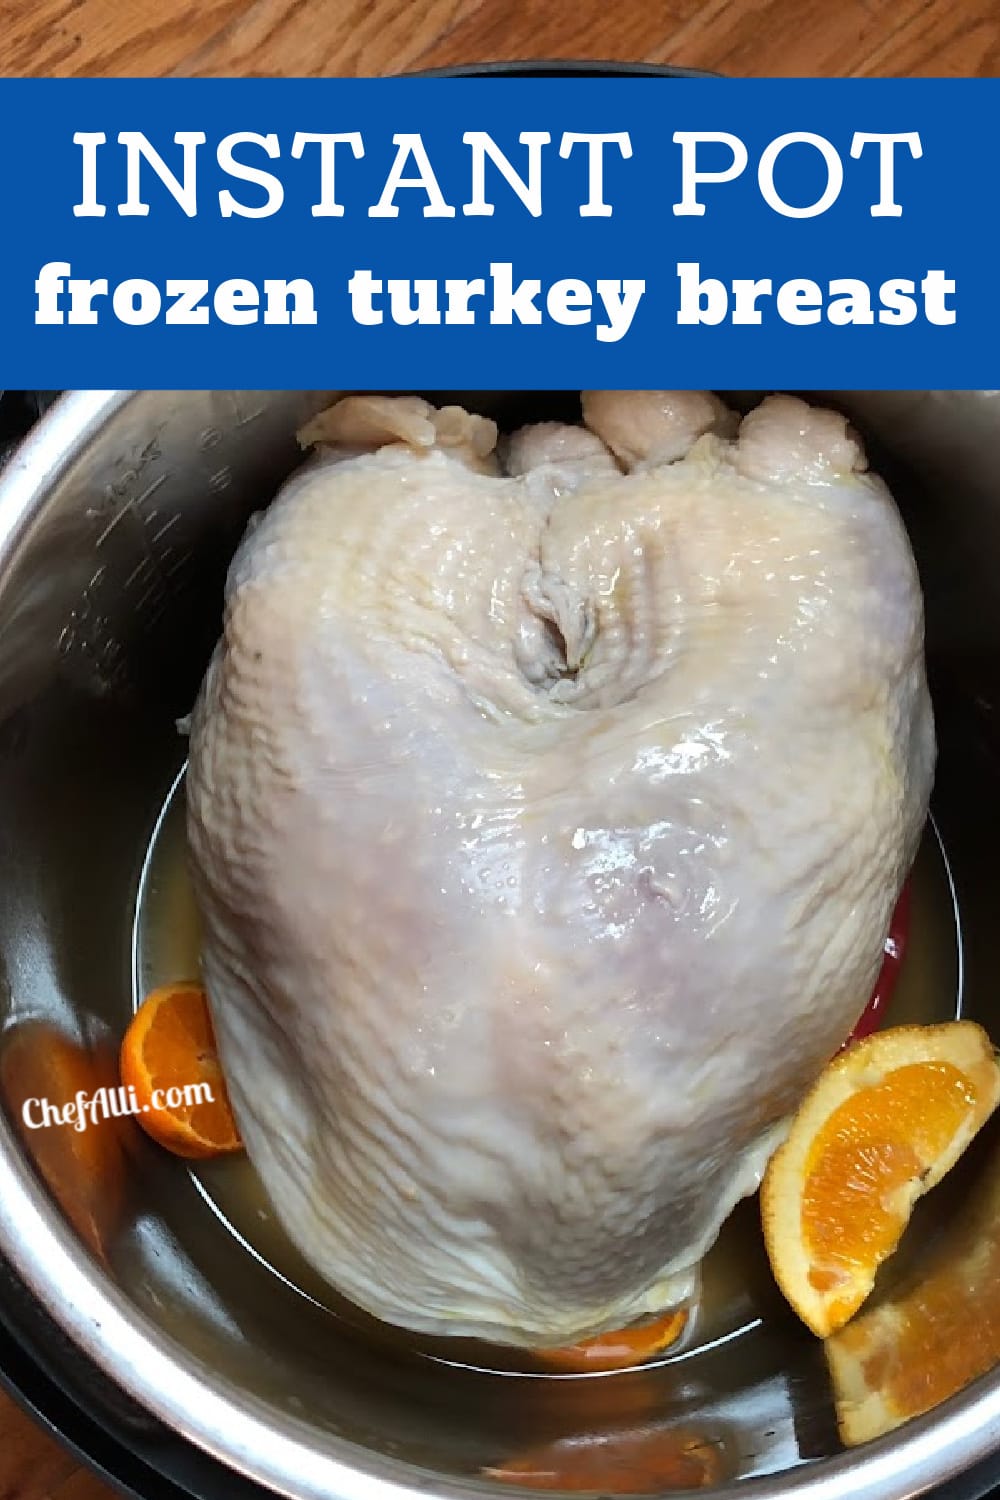 A large frozen turkey breast ready to be cooked in the Instant Pot.